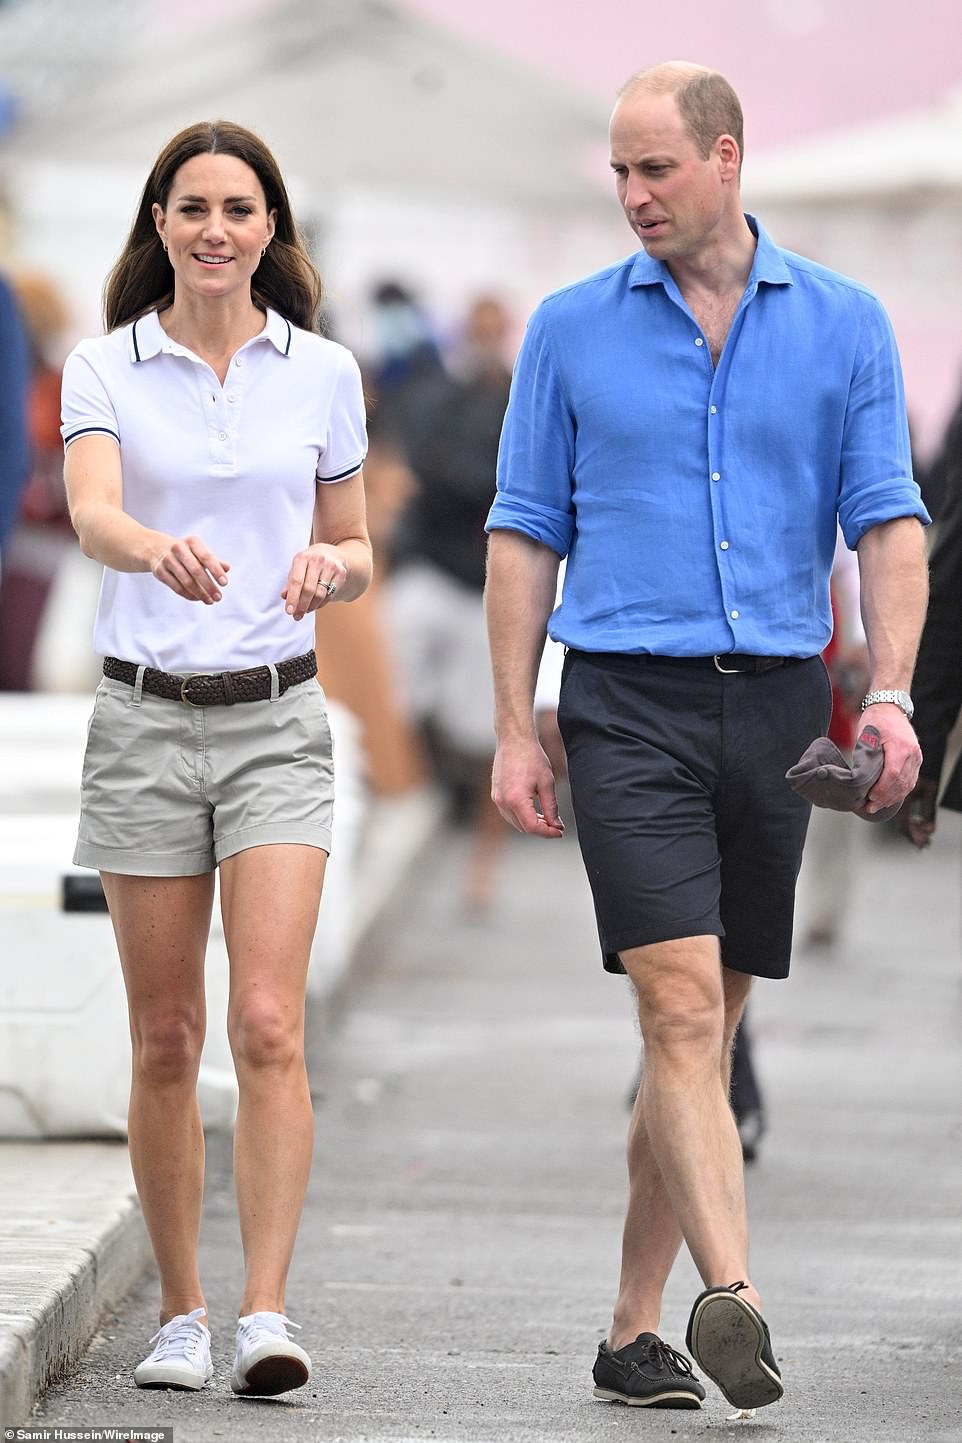 The Duke and Duchess of Cambridge on their way to attend The Bahamas Platinum Jubilee Sailing Regatta in Montagu Bay